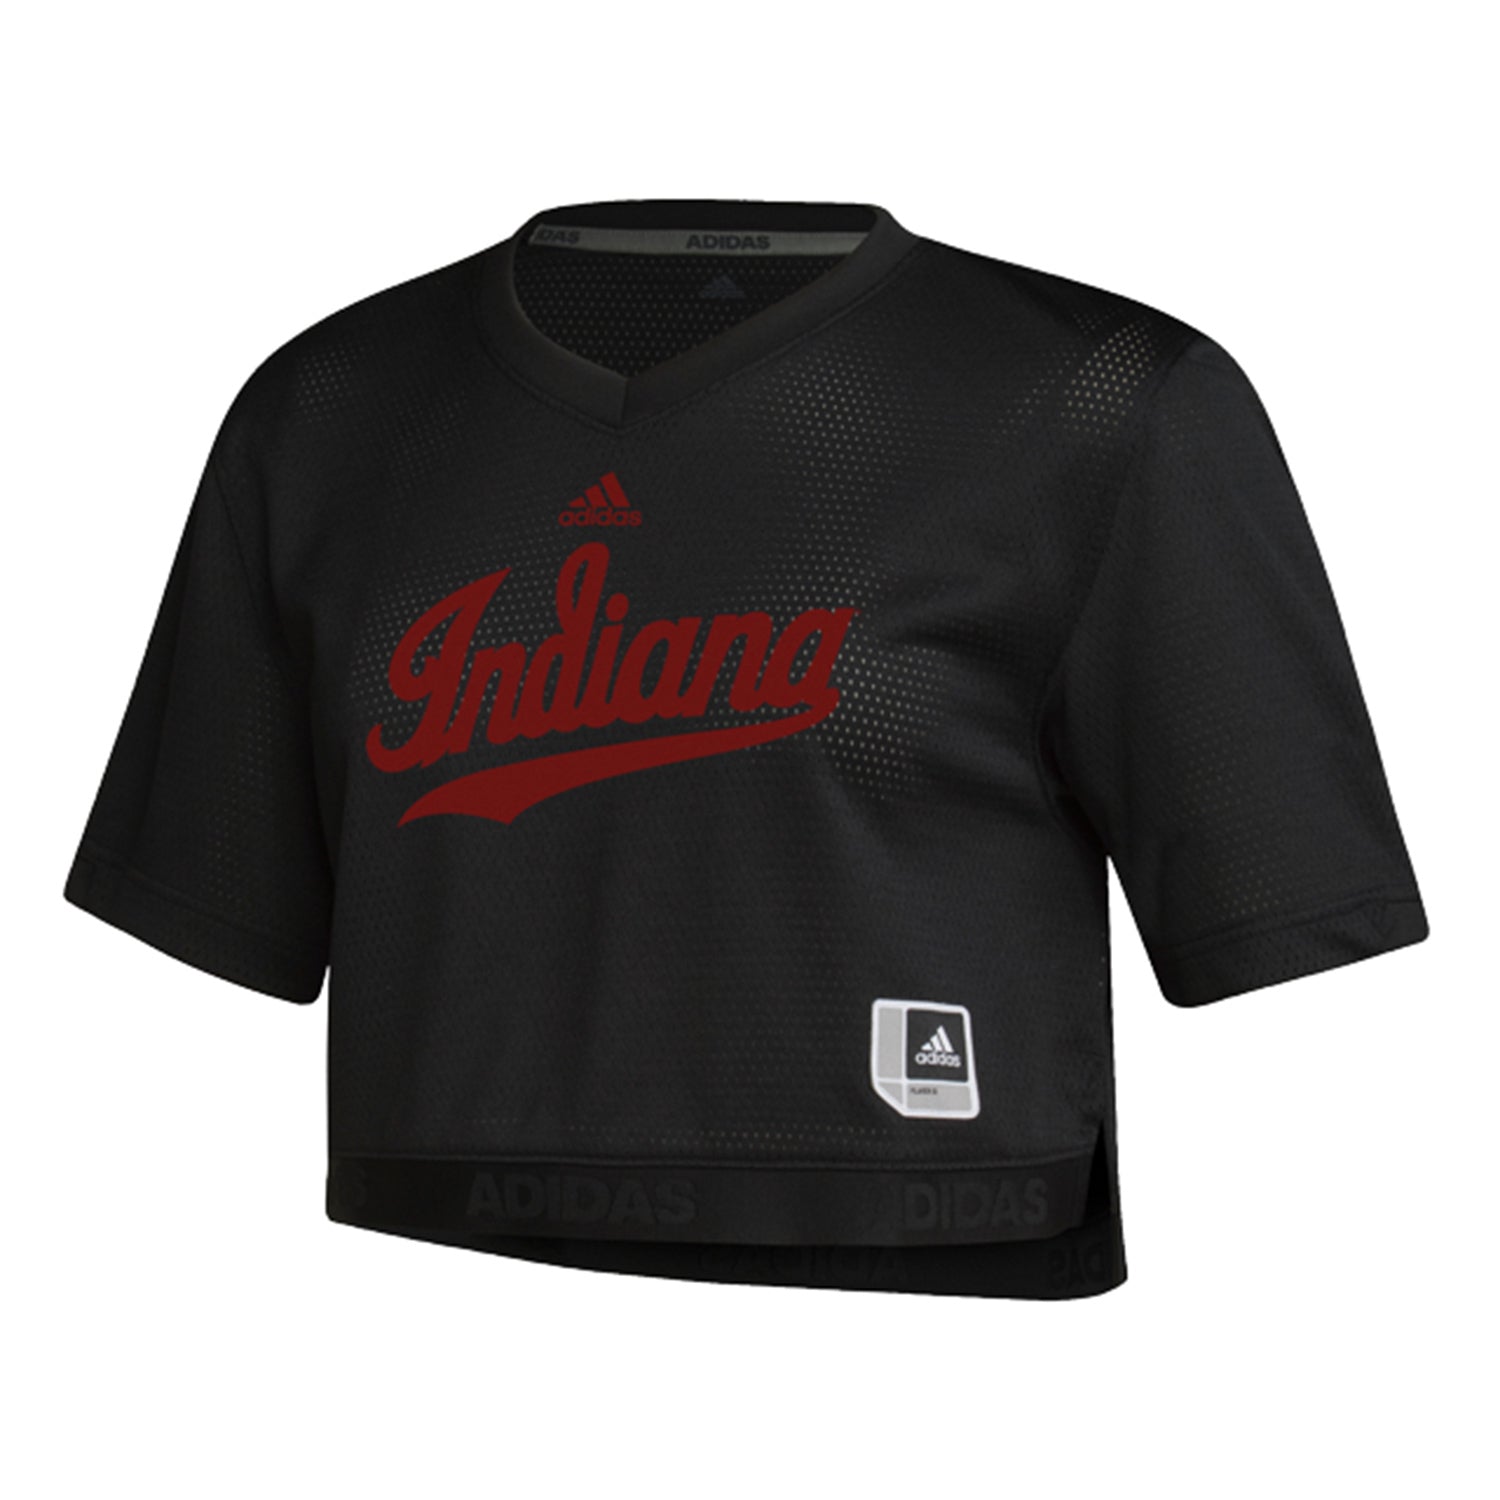 Indianapolis Indians Youth Red Replica Jersey